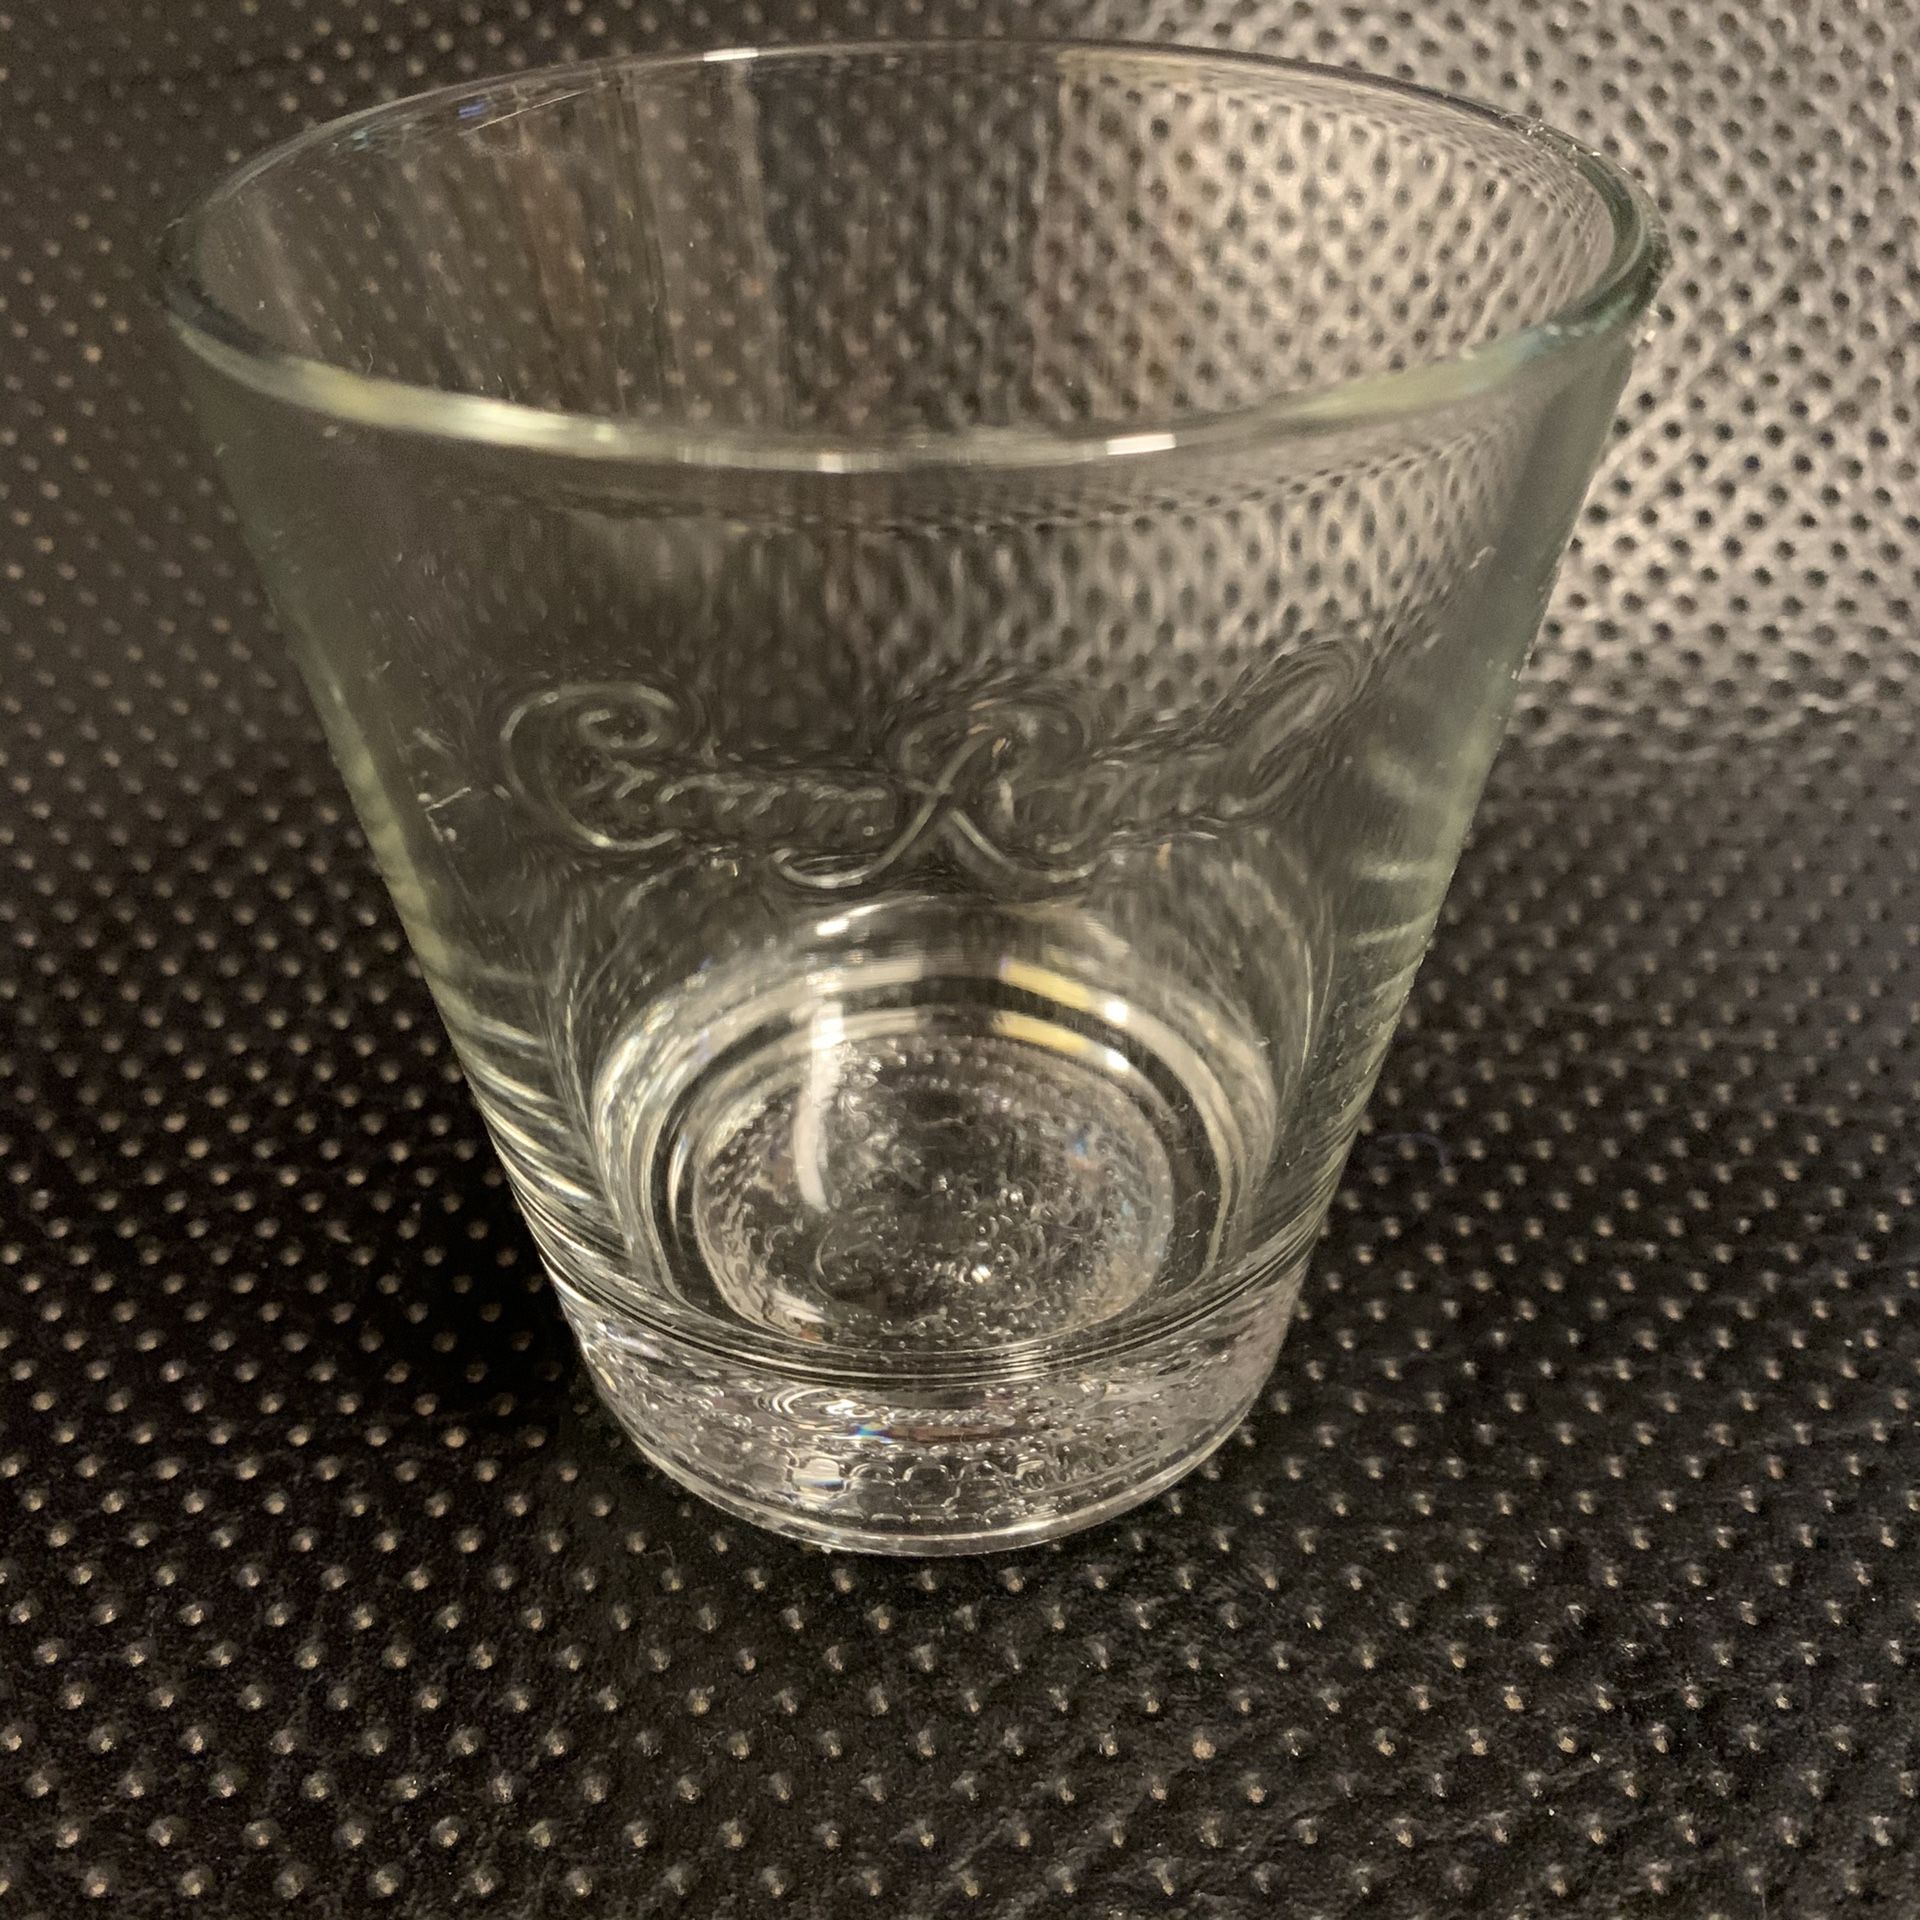 Crown royal drinking glasses (new)